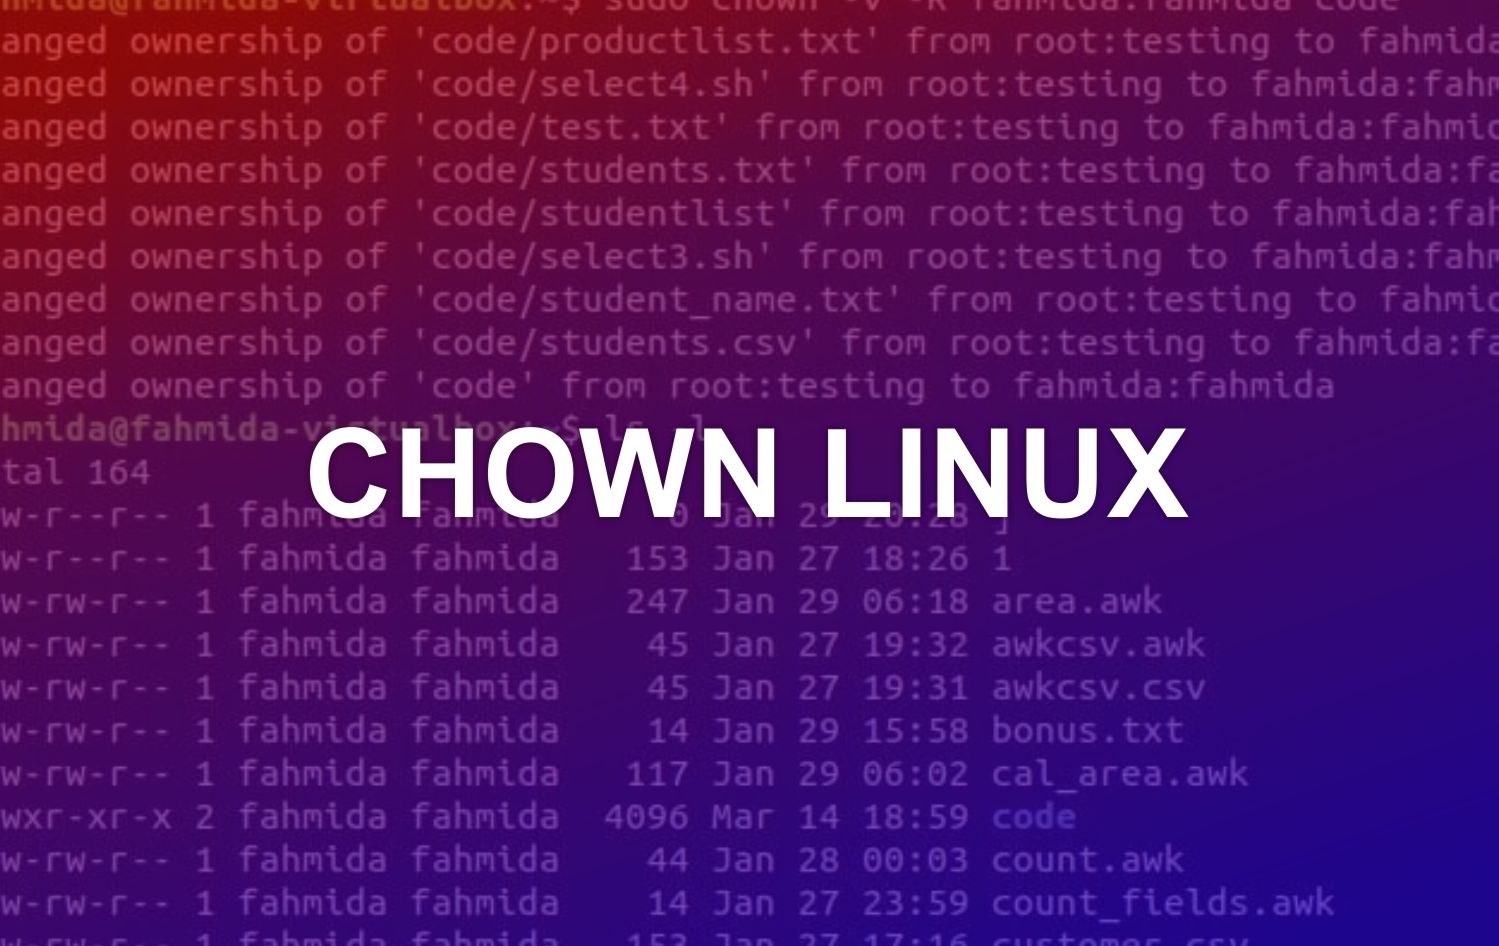 CHOWN LINUX